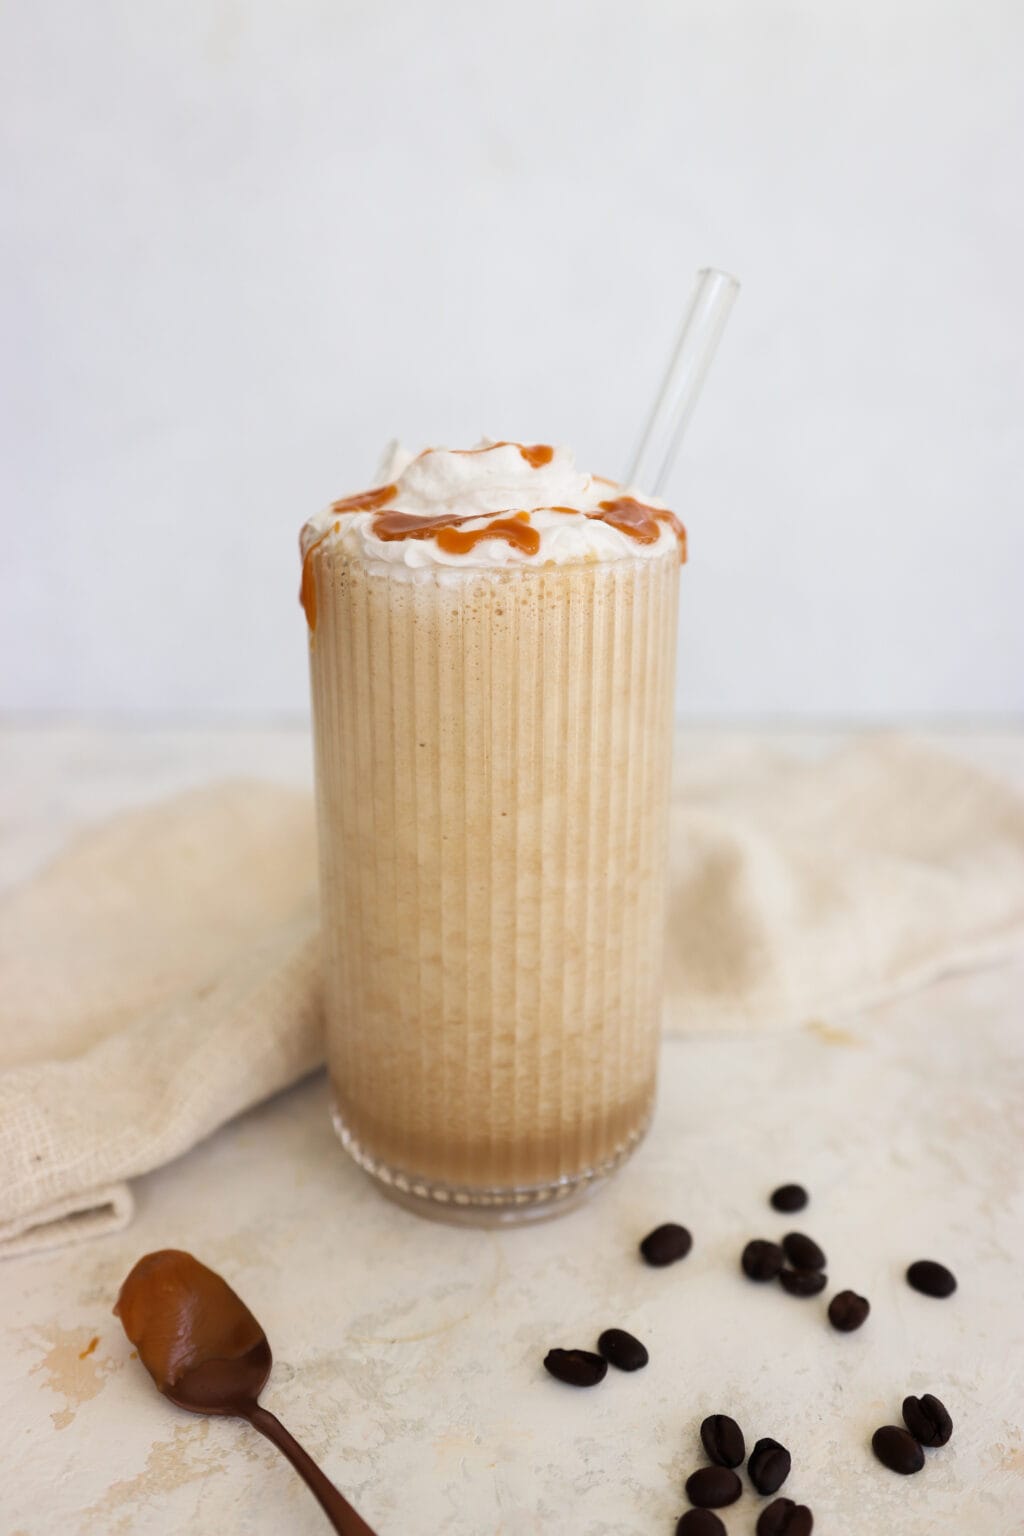 Coffee smoothie topped with whipped cream and caramel drizzle in a glass.